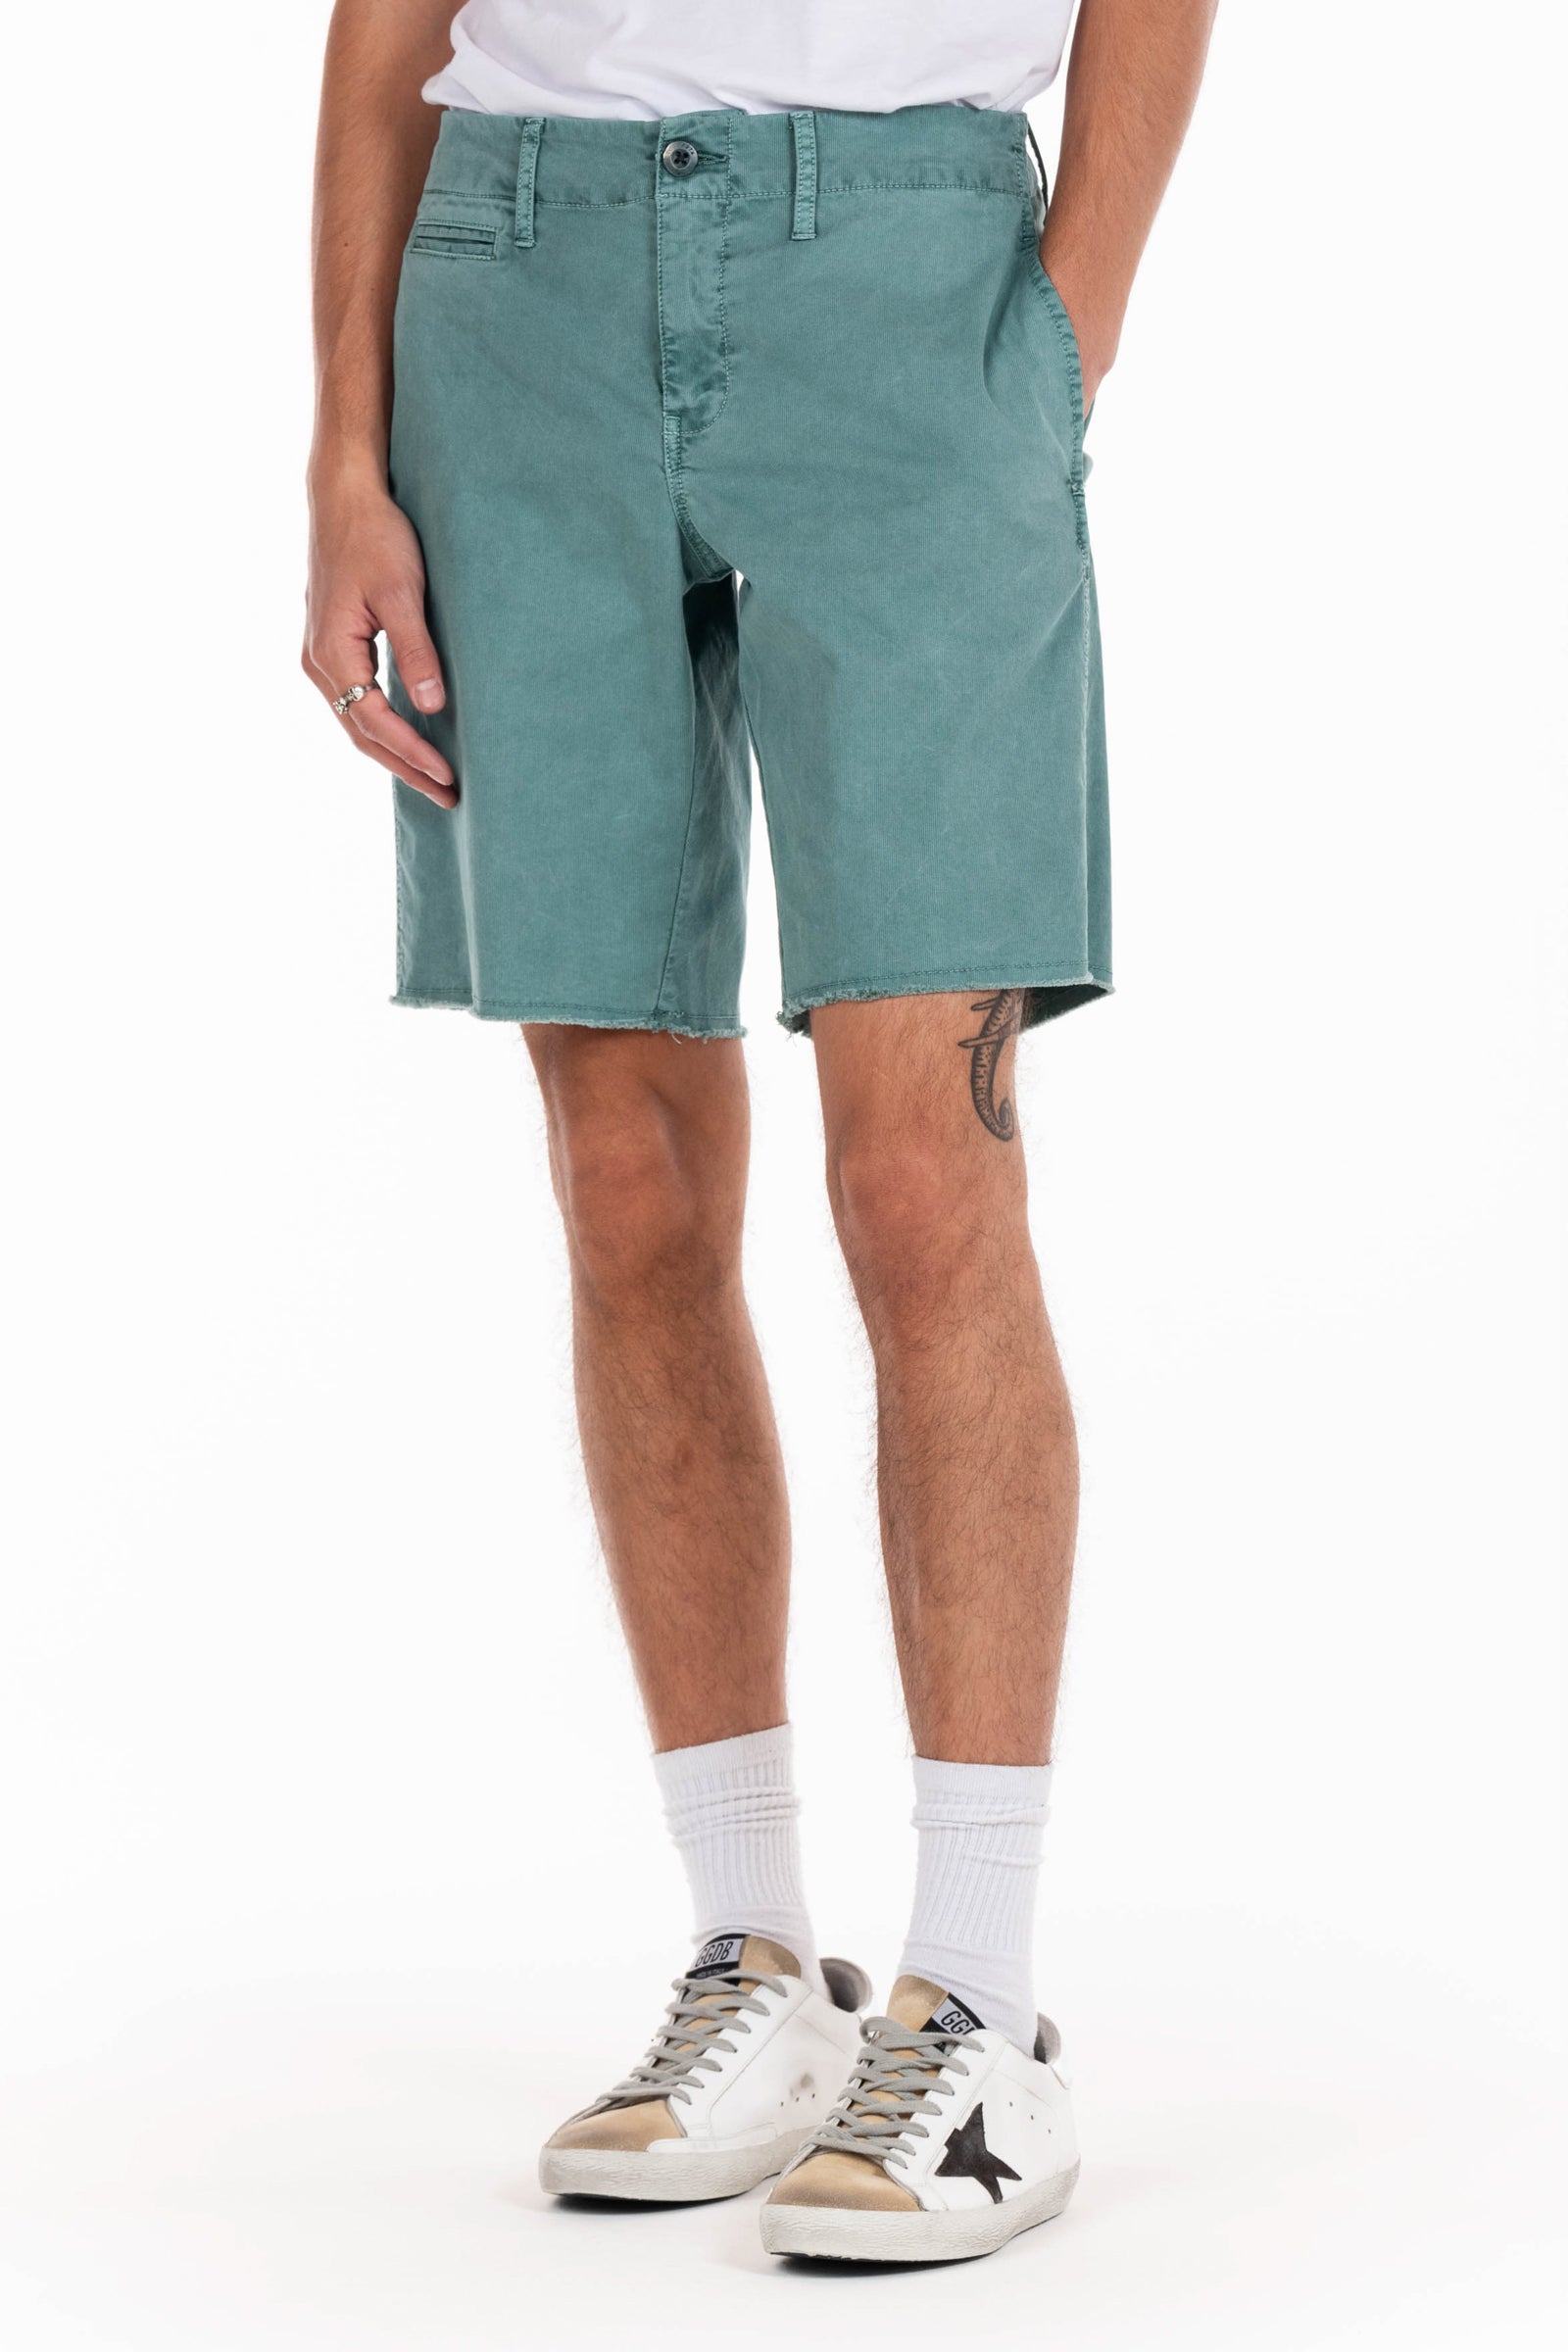 Original Paperbacks Rockland Chino Short in Breakwater on Model Cropped Styled View